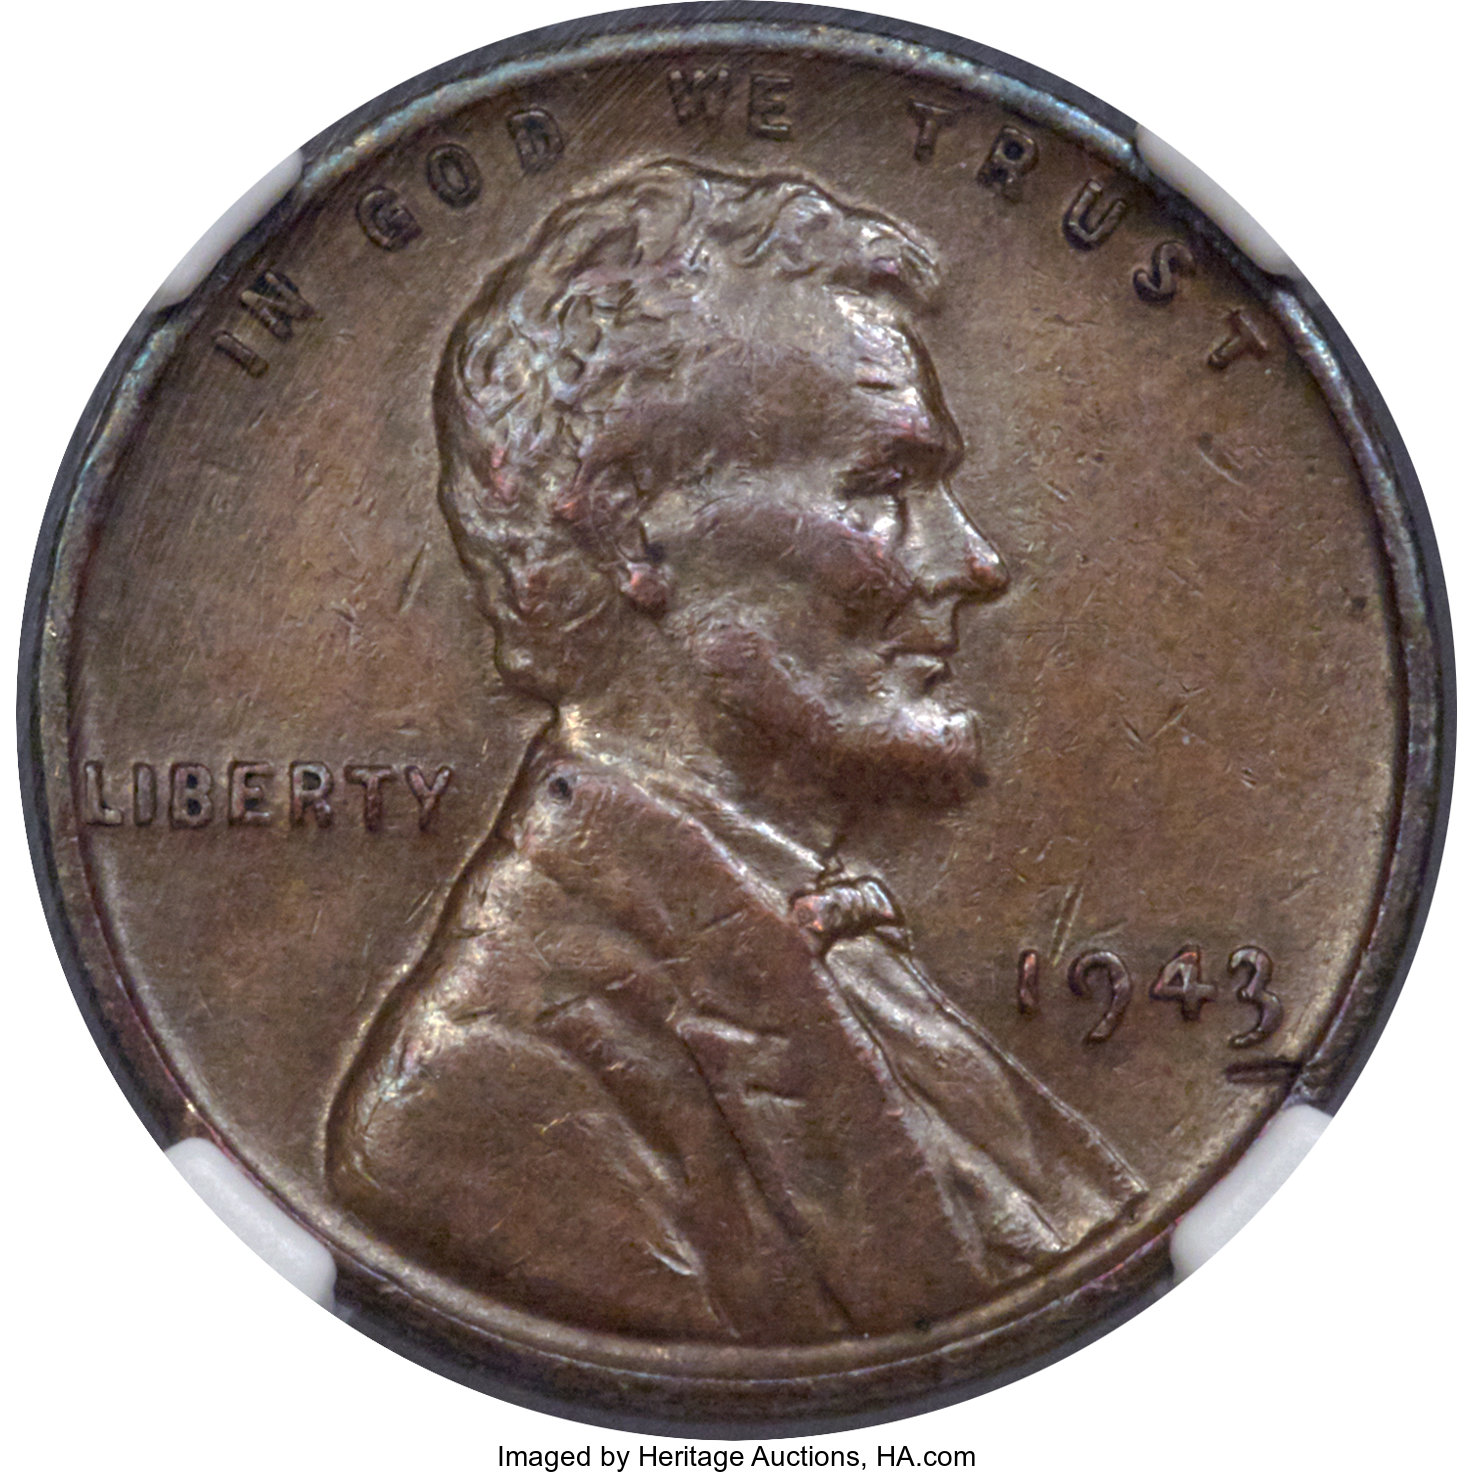 thumbnail image for 1943 Bronze Cent Drives Collectors Wild [Video]